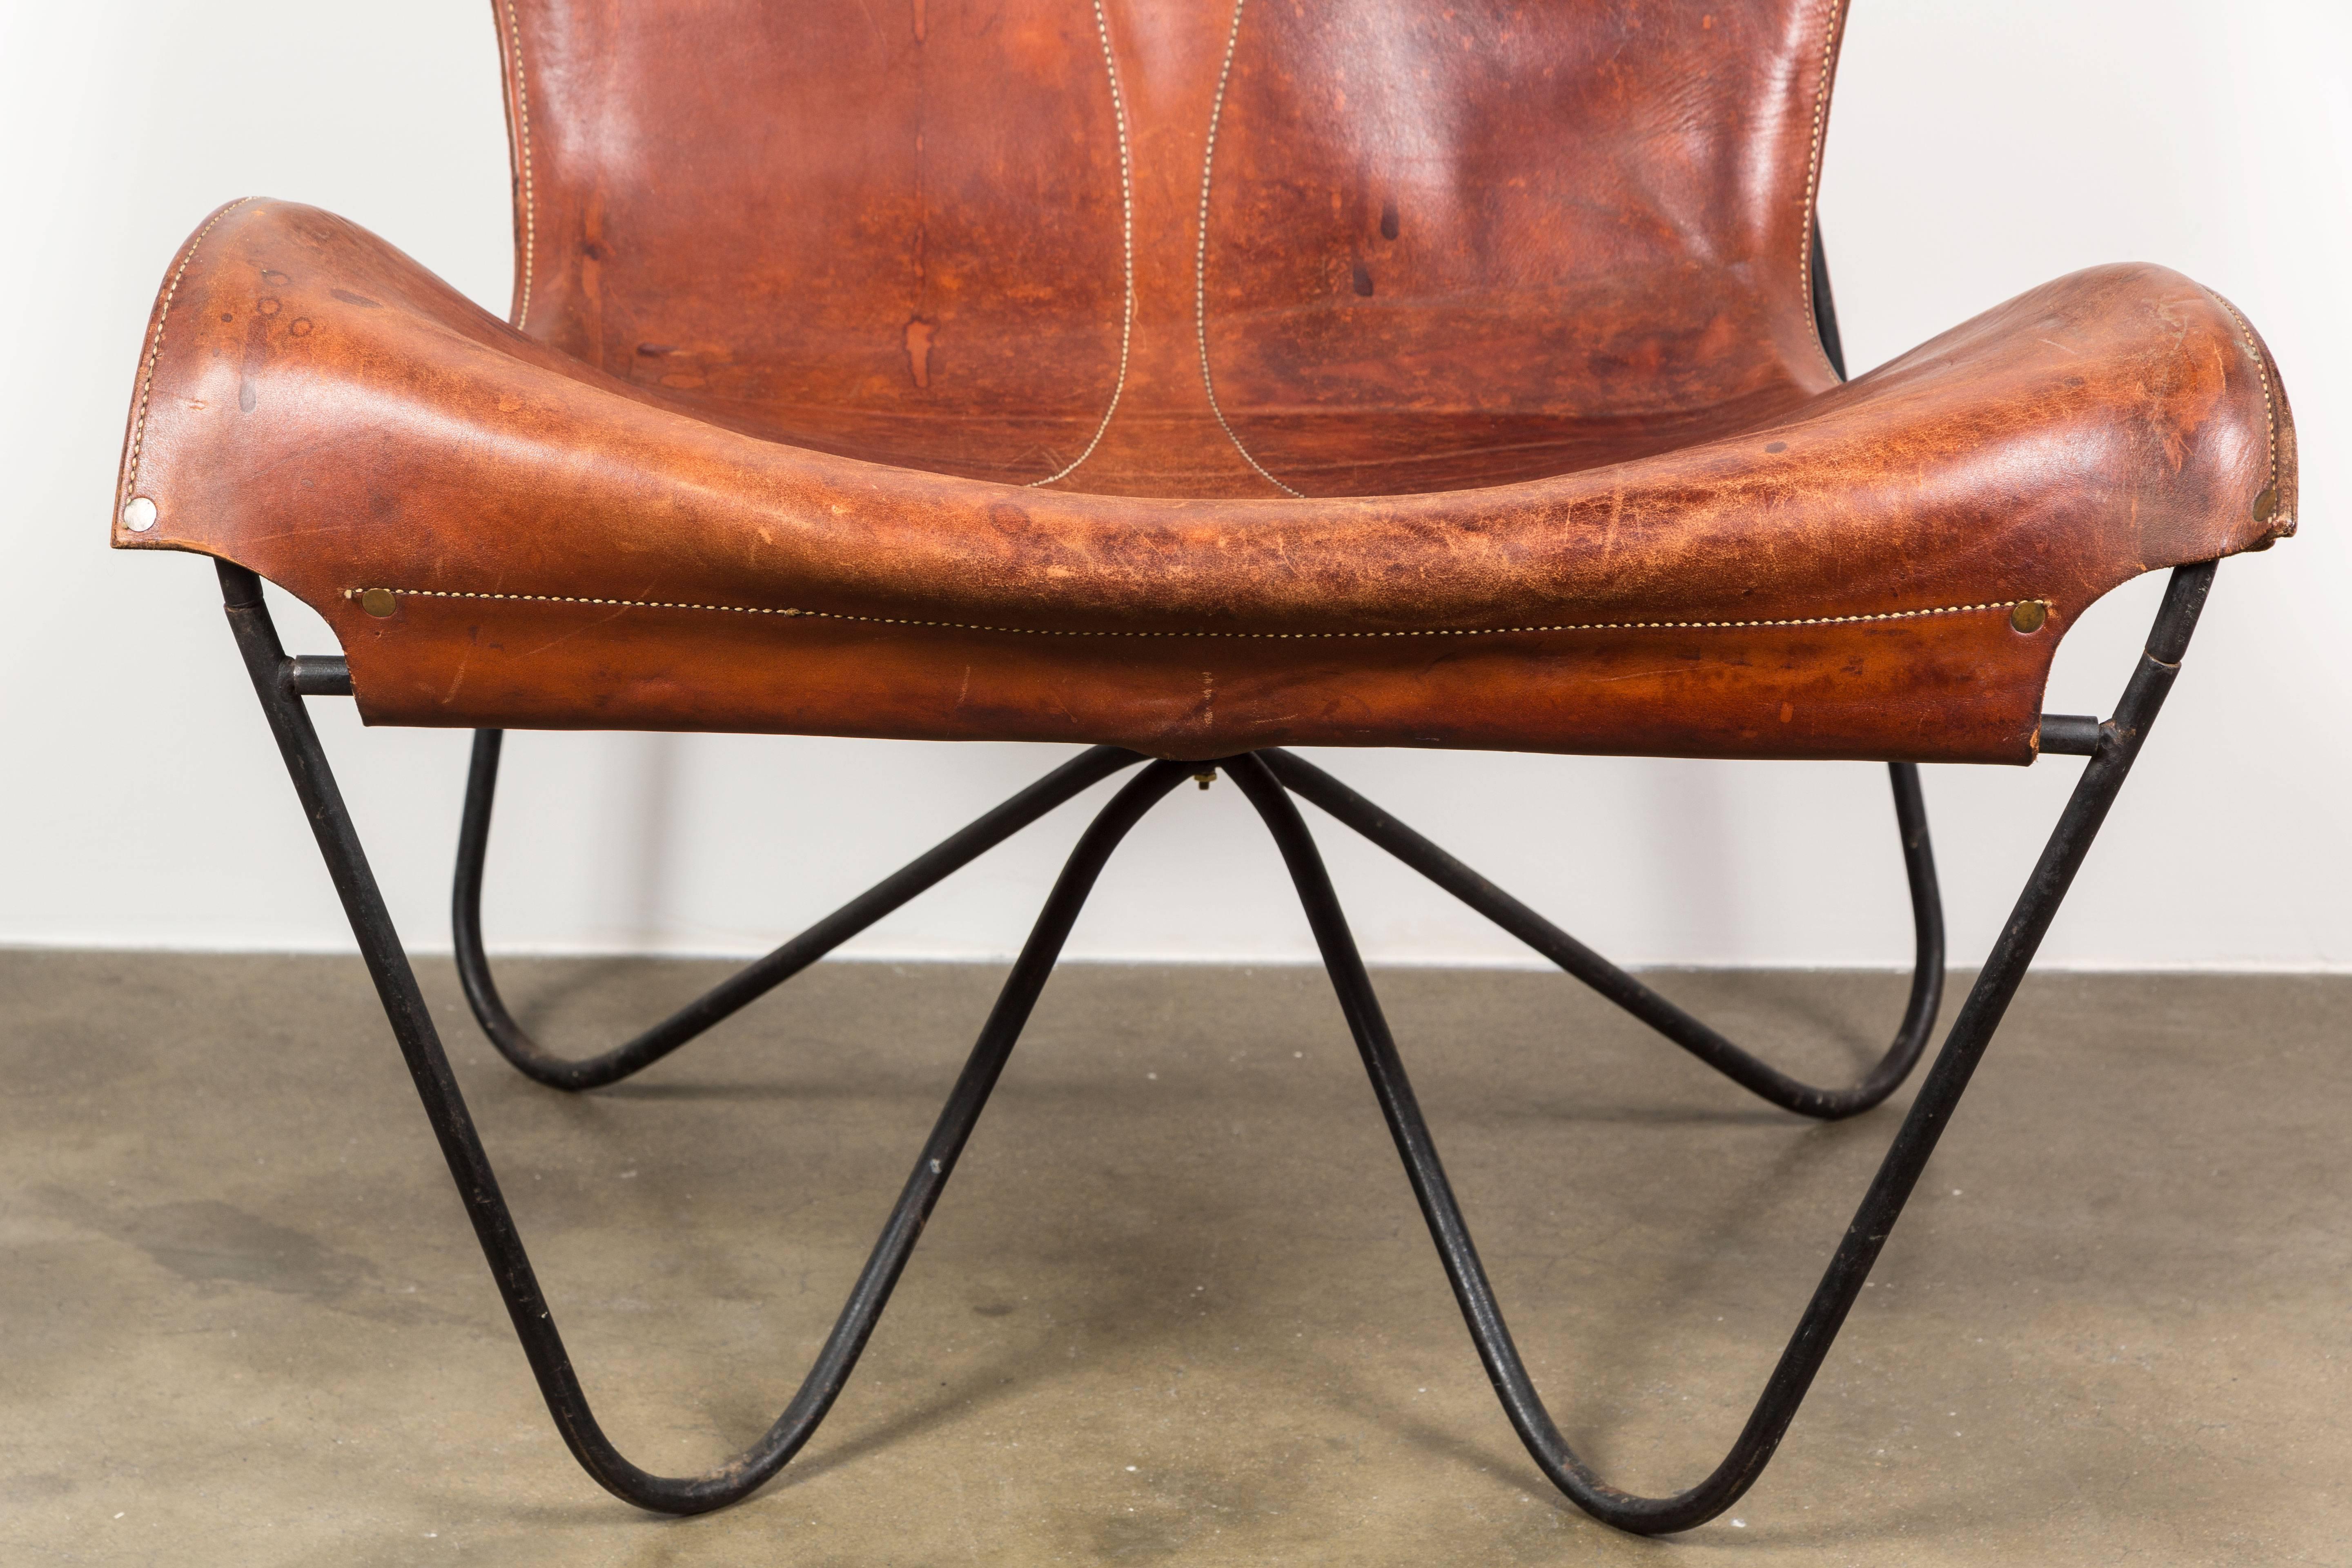 Enameled Patinated Leather Lounge Chair by Max Gottschalk